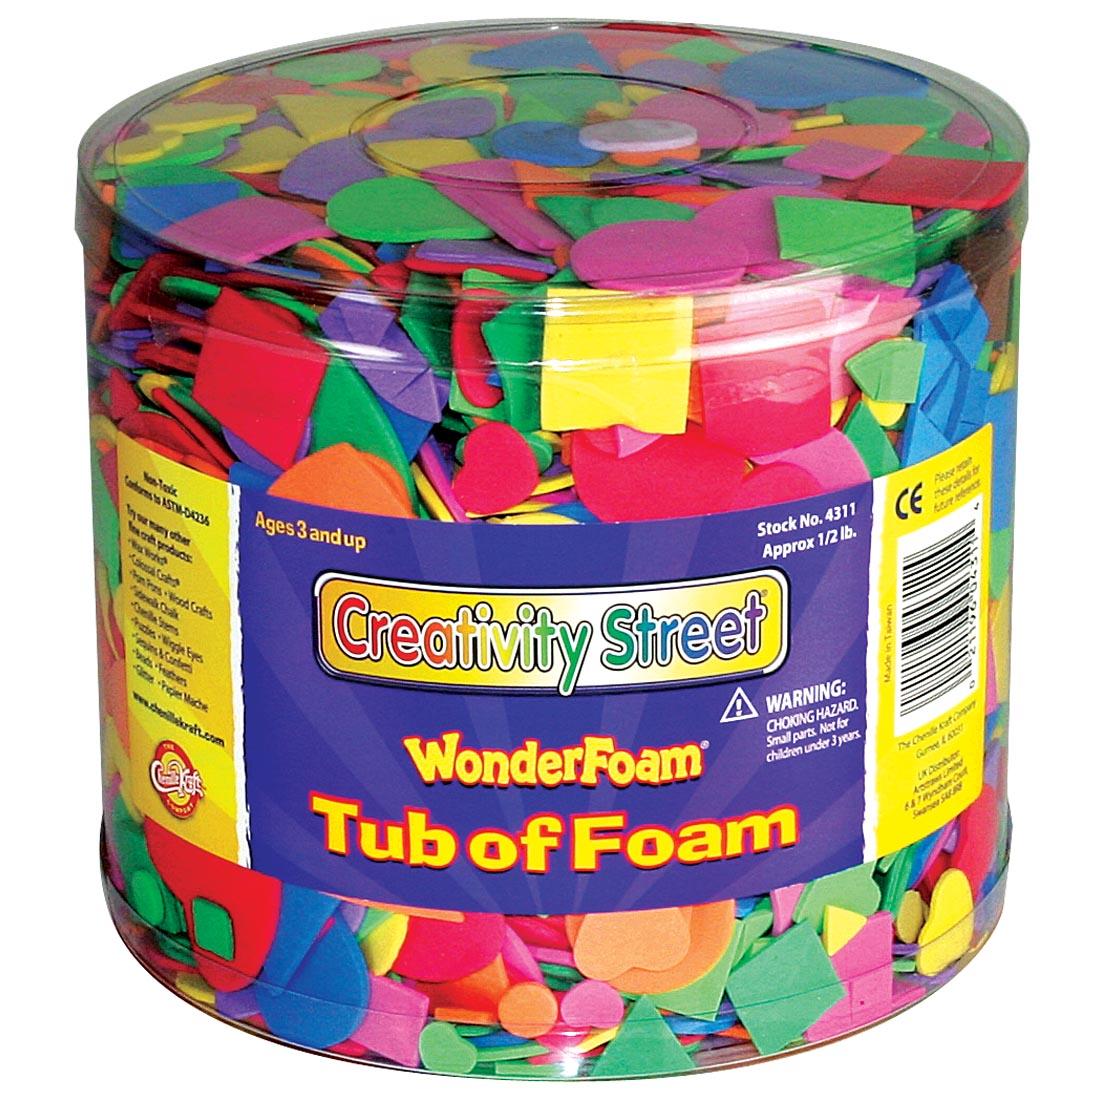 1/2 lb. package of Creativity Street WonderFoam Shapes in assorted colors, shapes and sizes